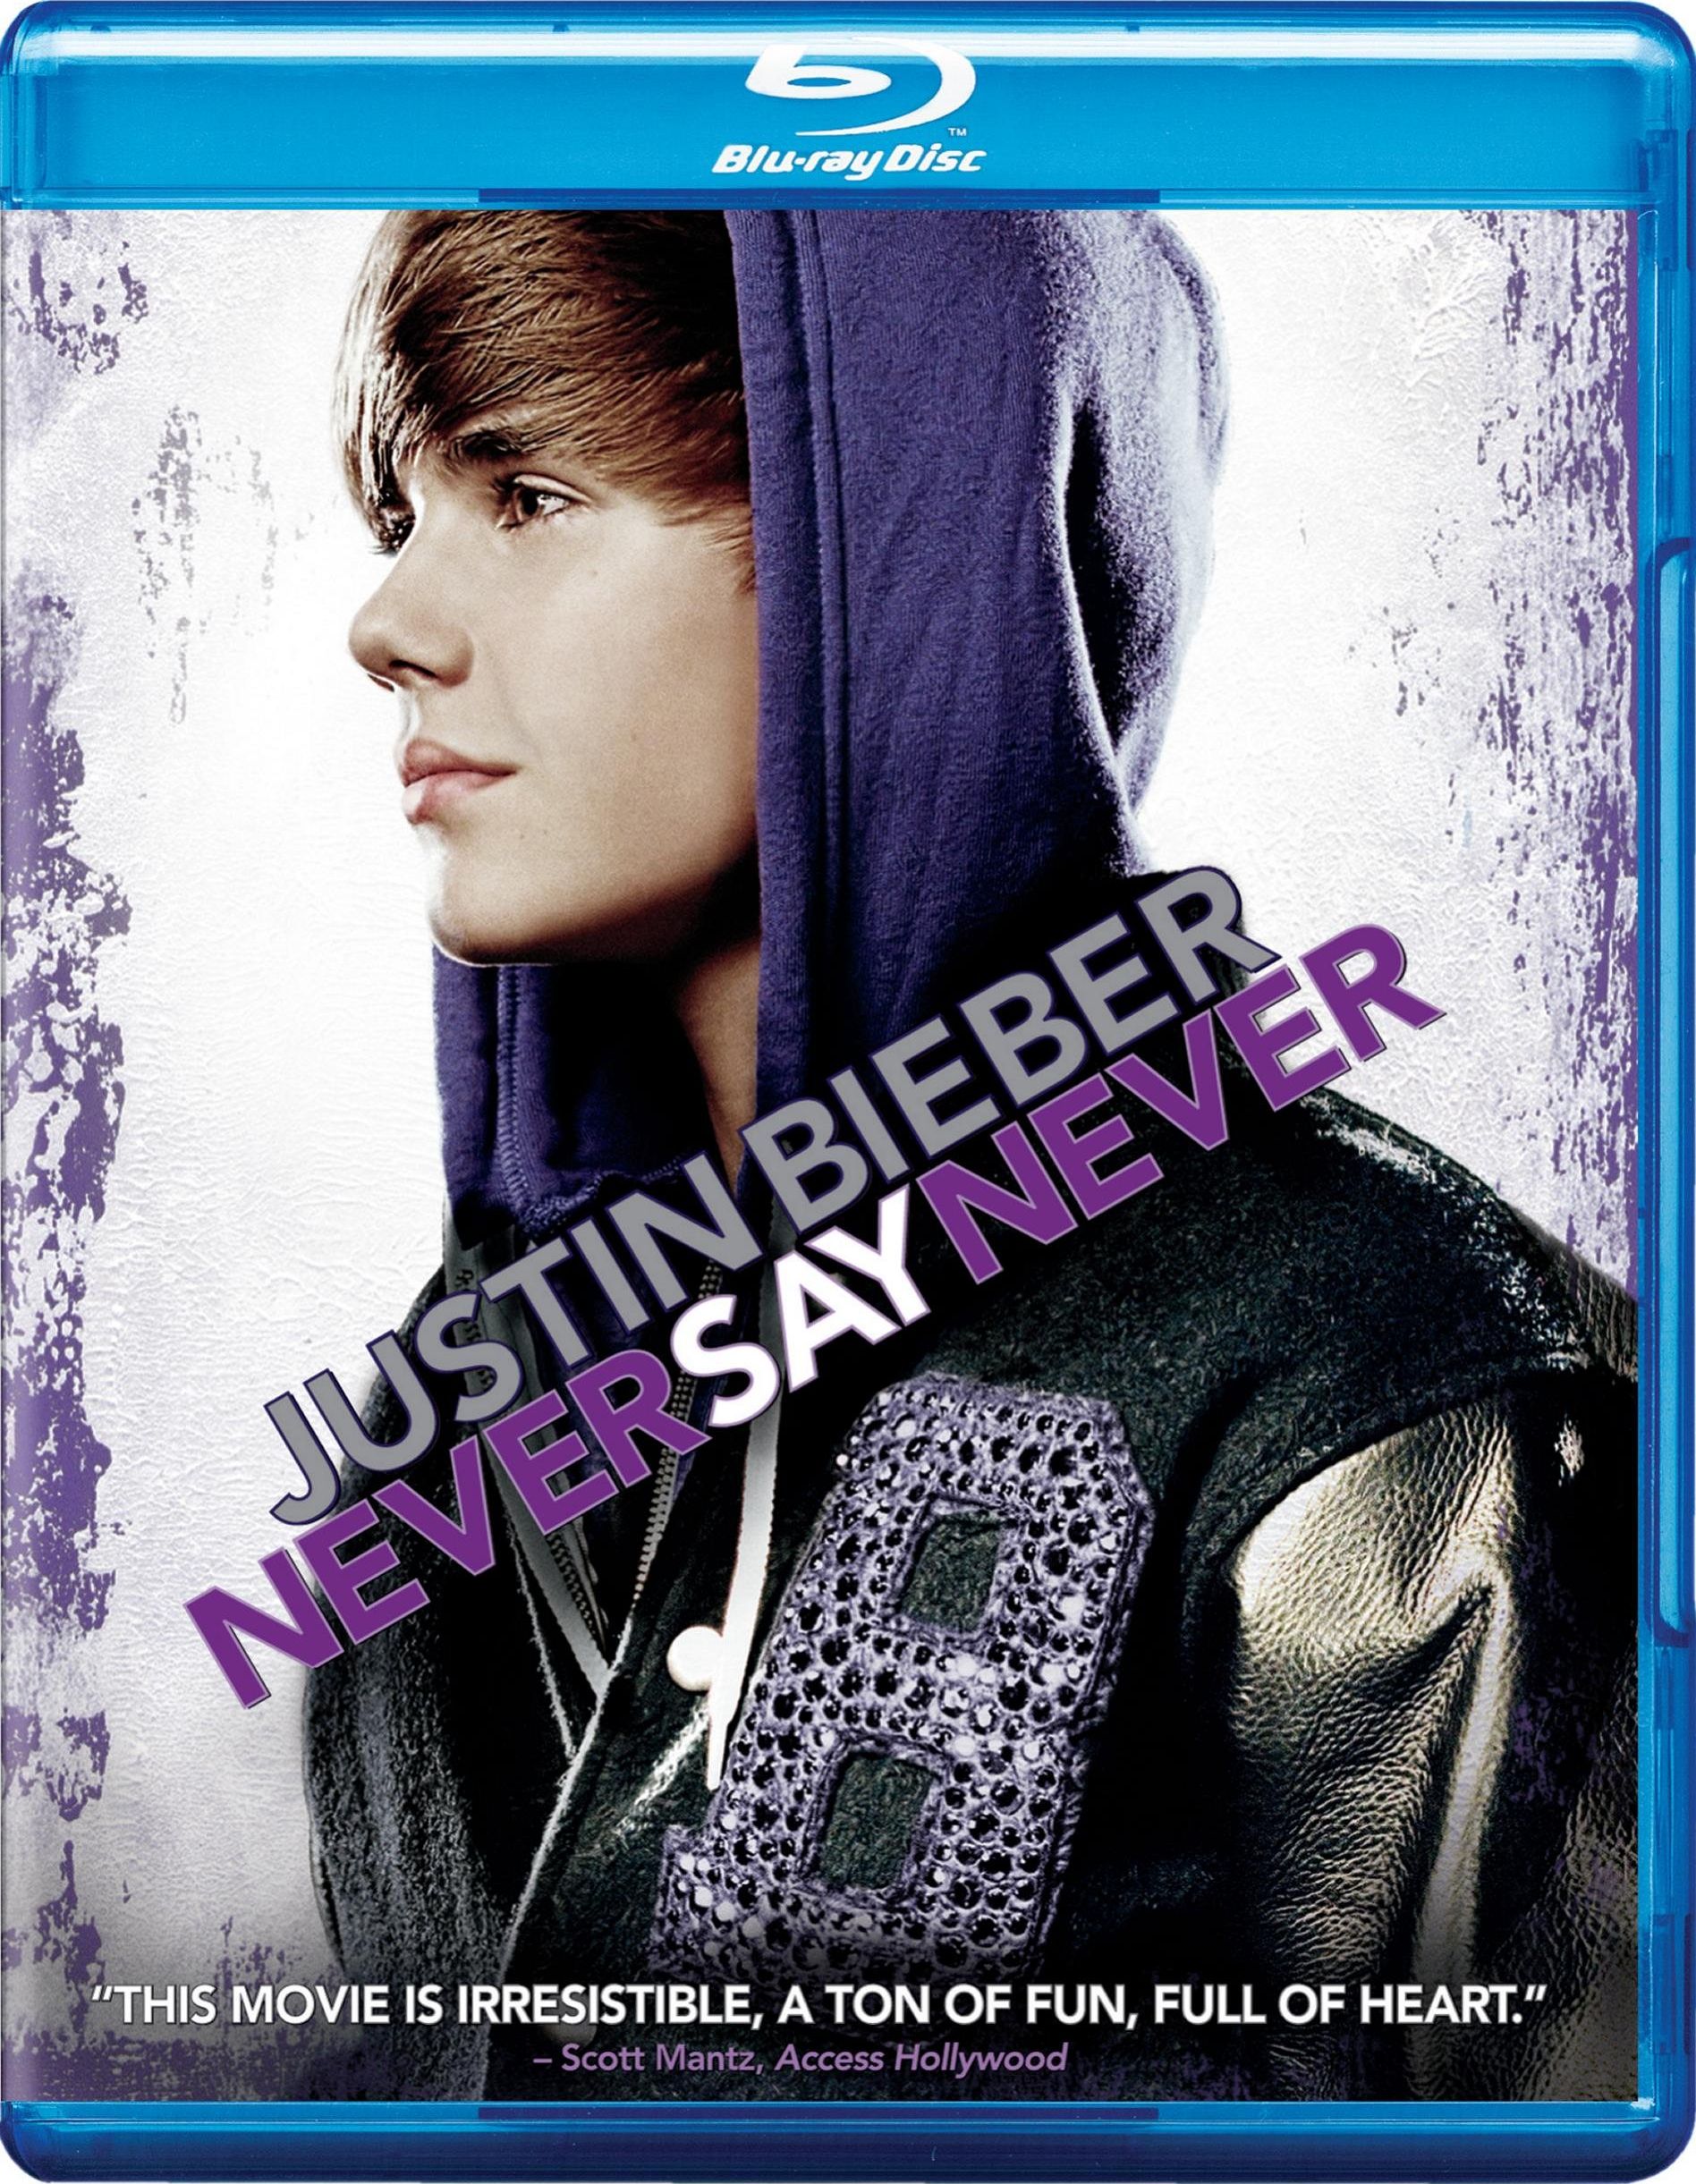 Justin Bieber: Never Say Never DVD Release Date May 13, 2011 - Never Say Never Justin Bieber Cover